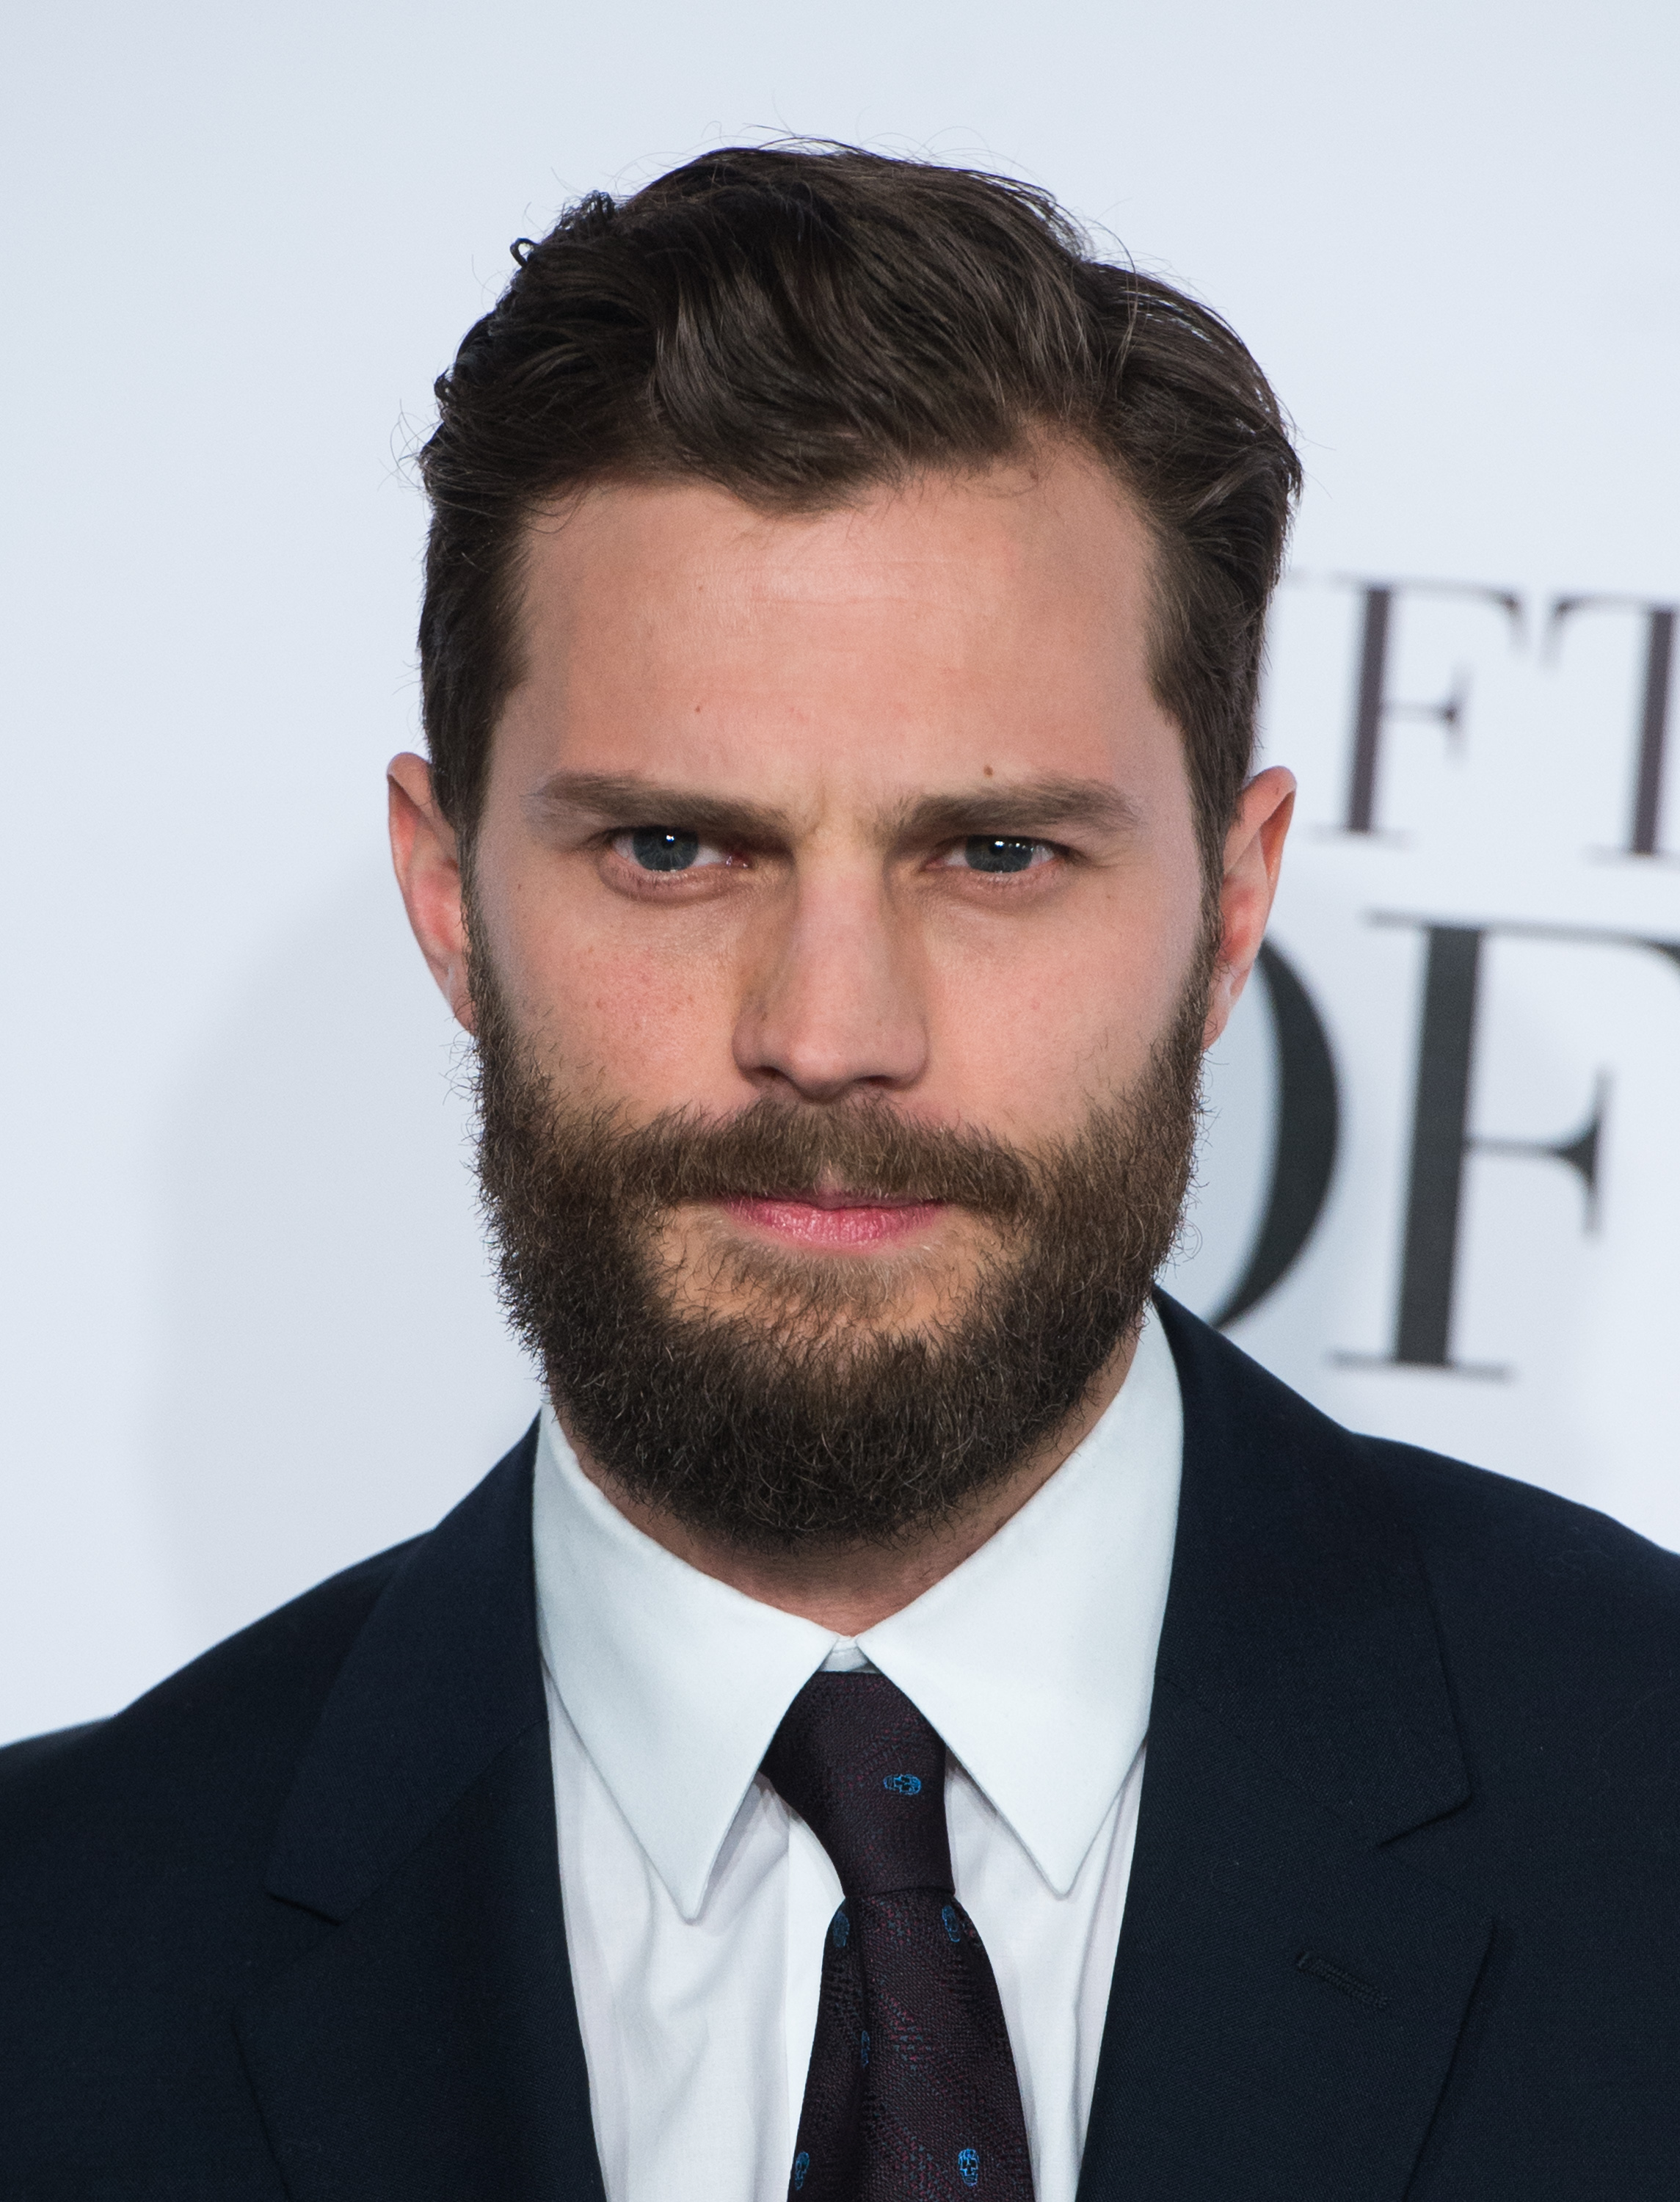 Jamie Dornan attends the UK Premiere of 'Fifty Shades Of Grey' in London on Feb. 12, 2015.